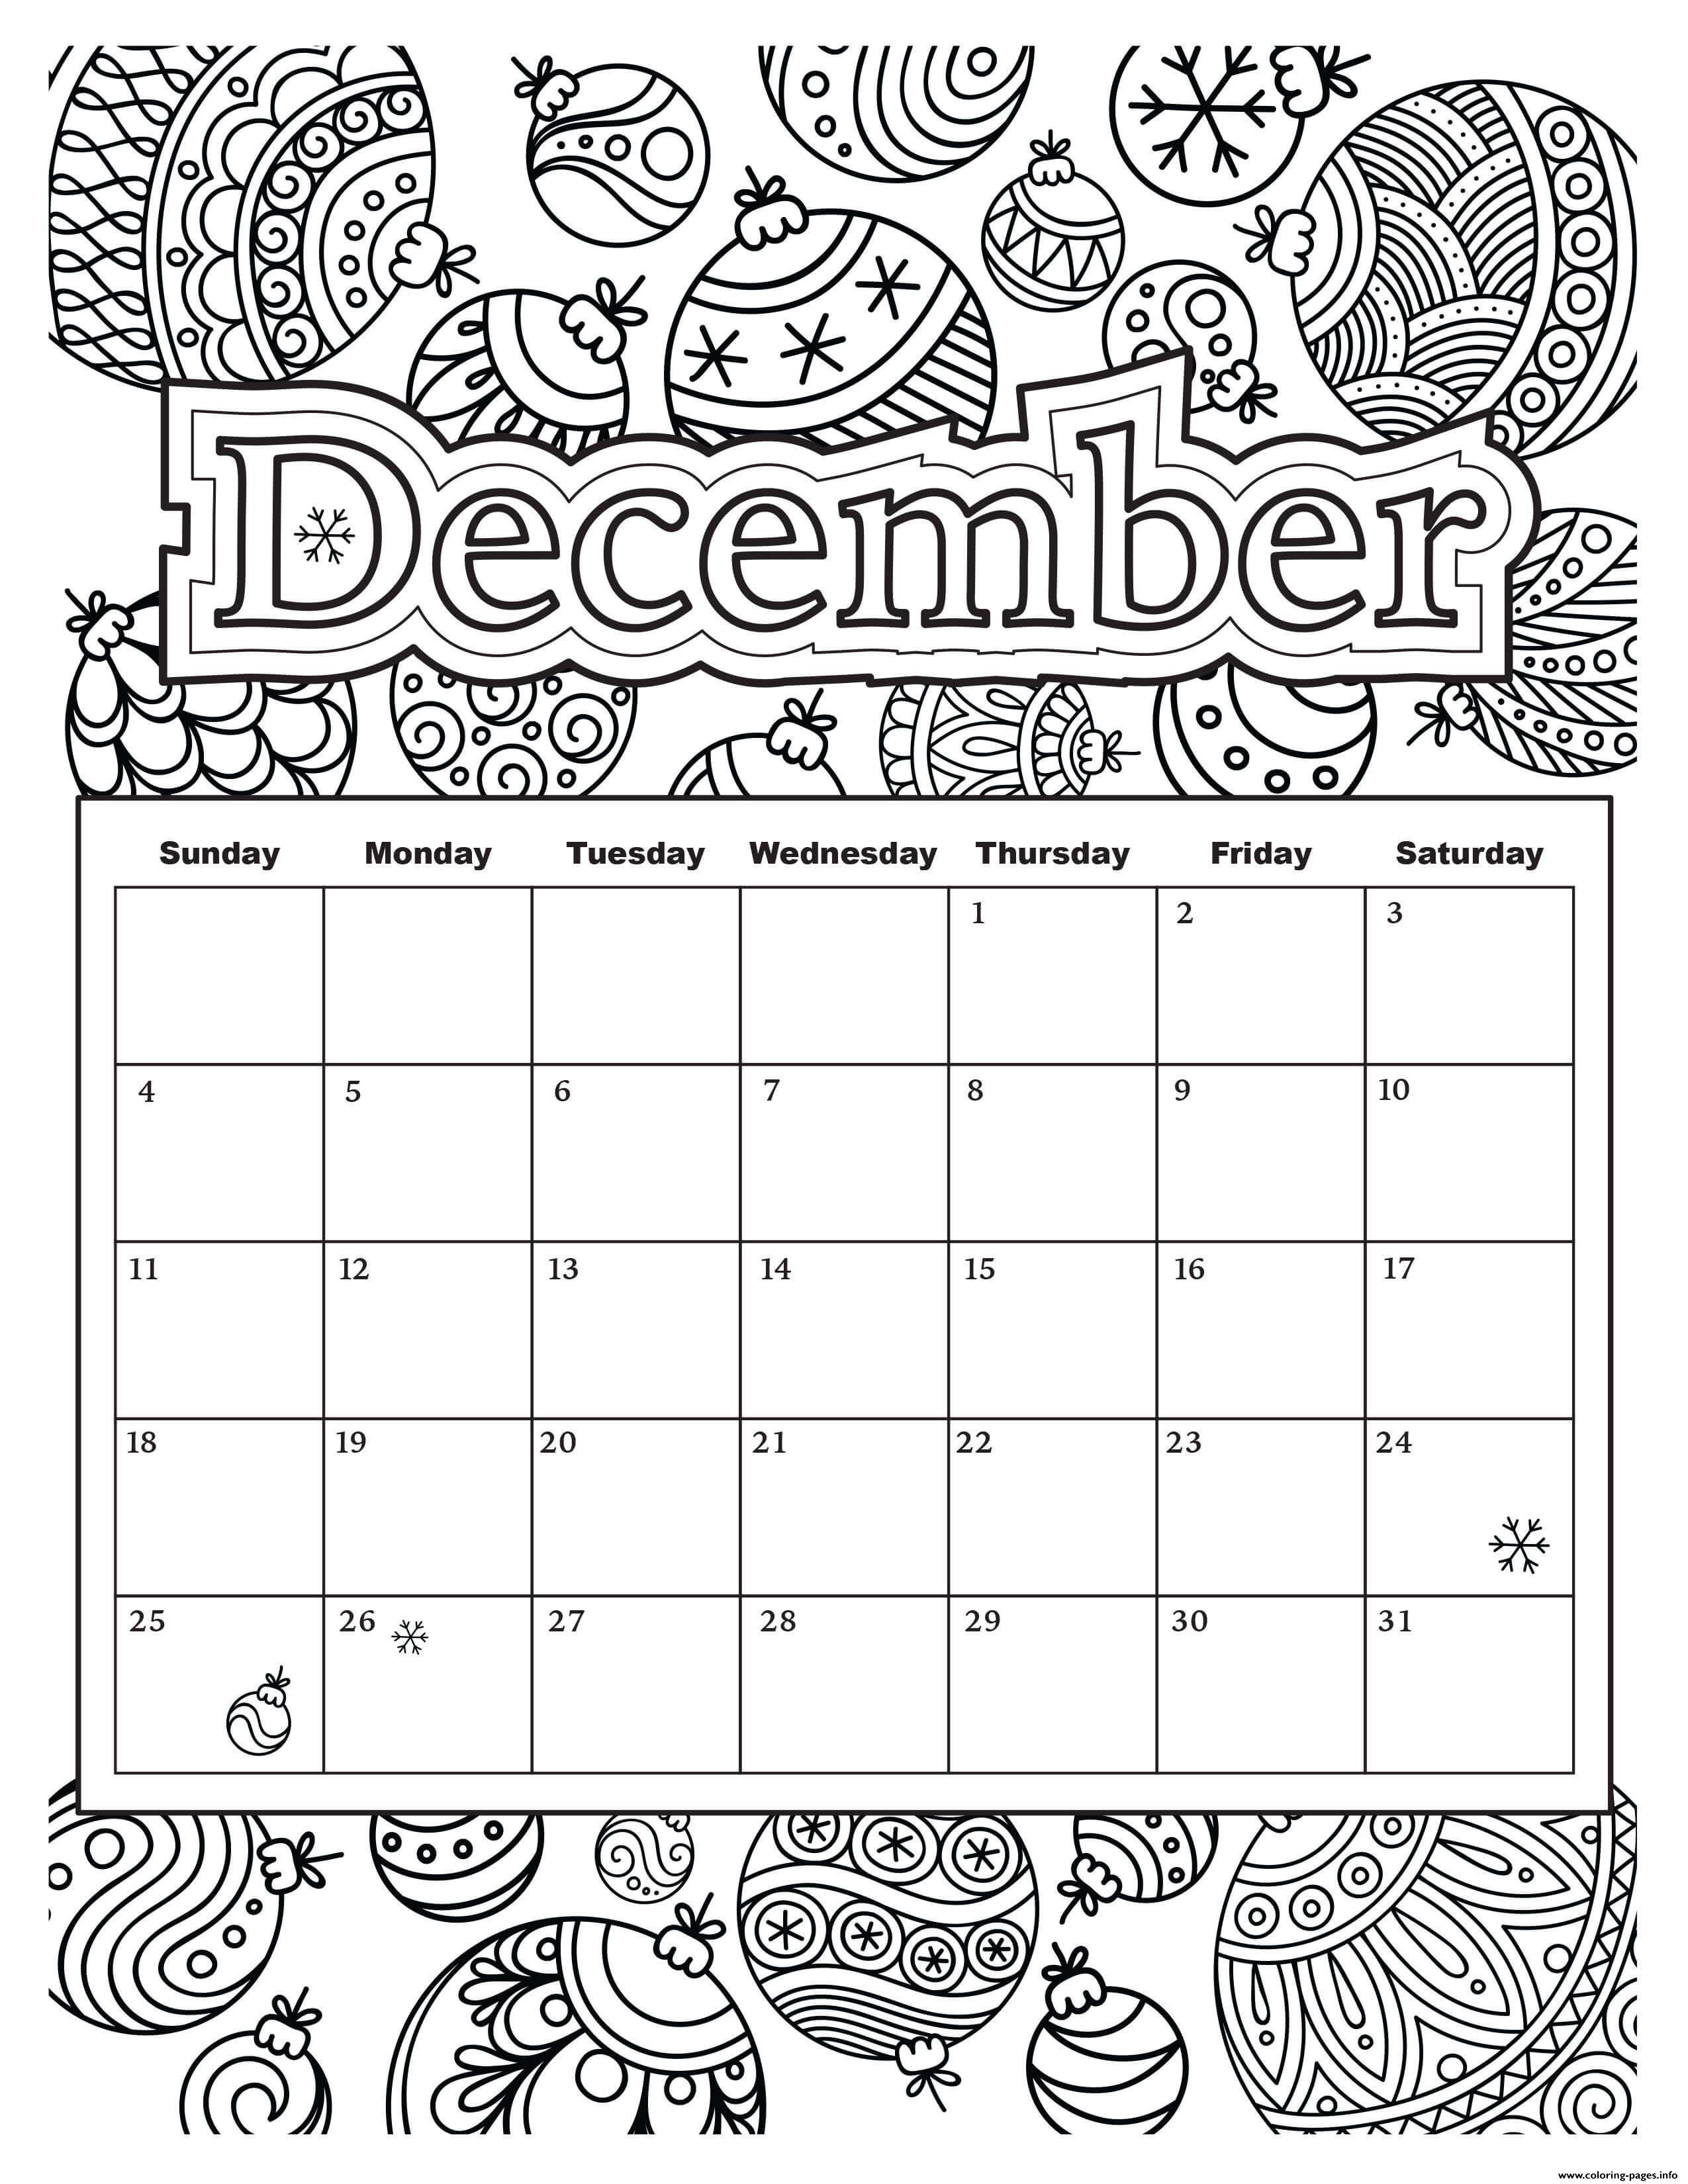 December Coloring Pages To Download And Print For Free Pin On Seasons